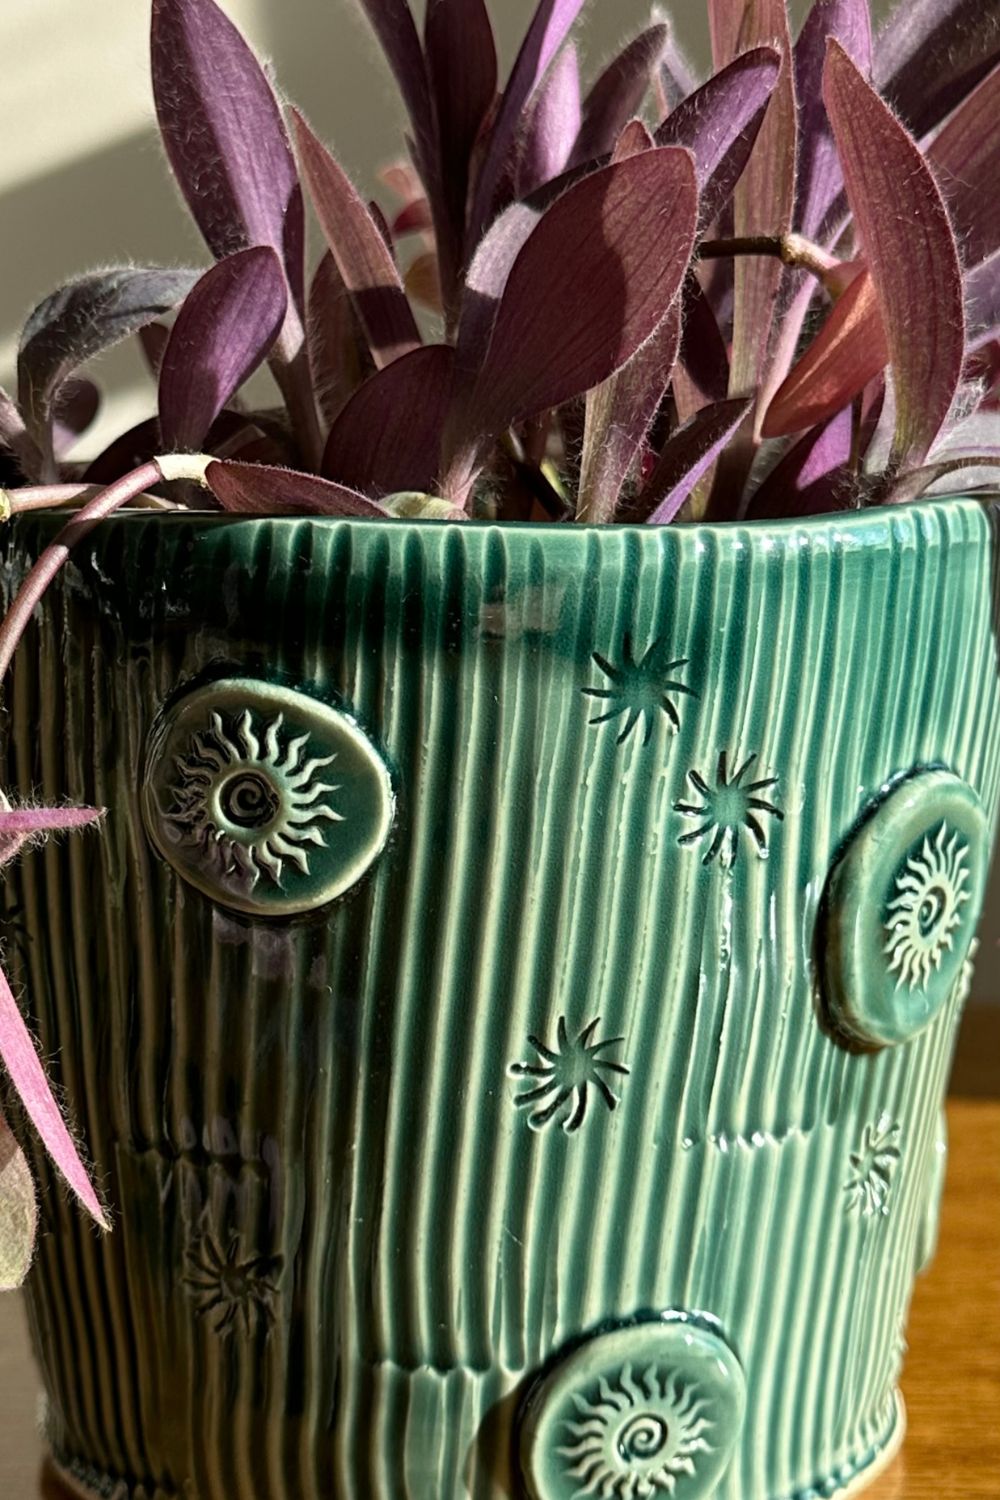 It's summertime! Decorate a sunny clay planter with us!